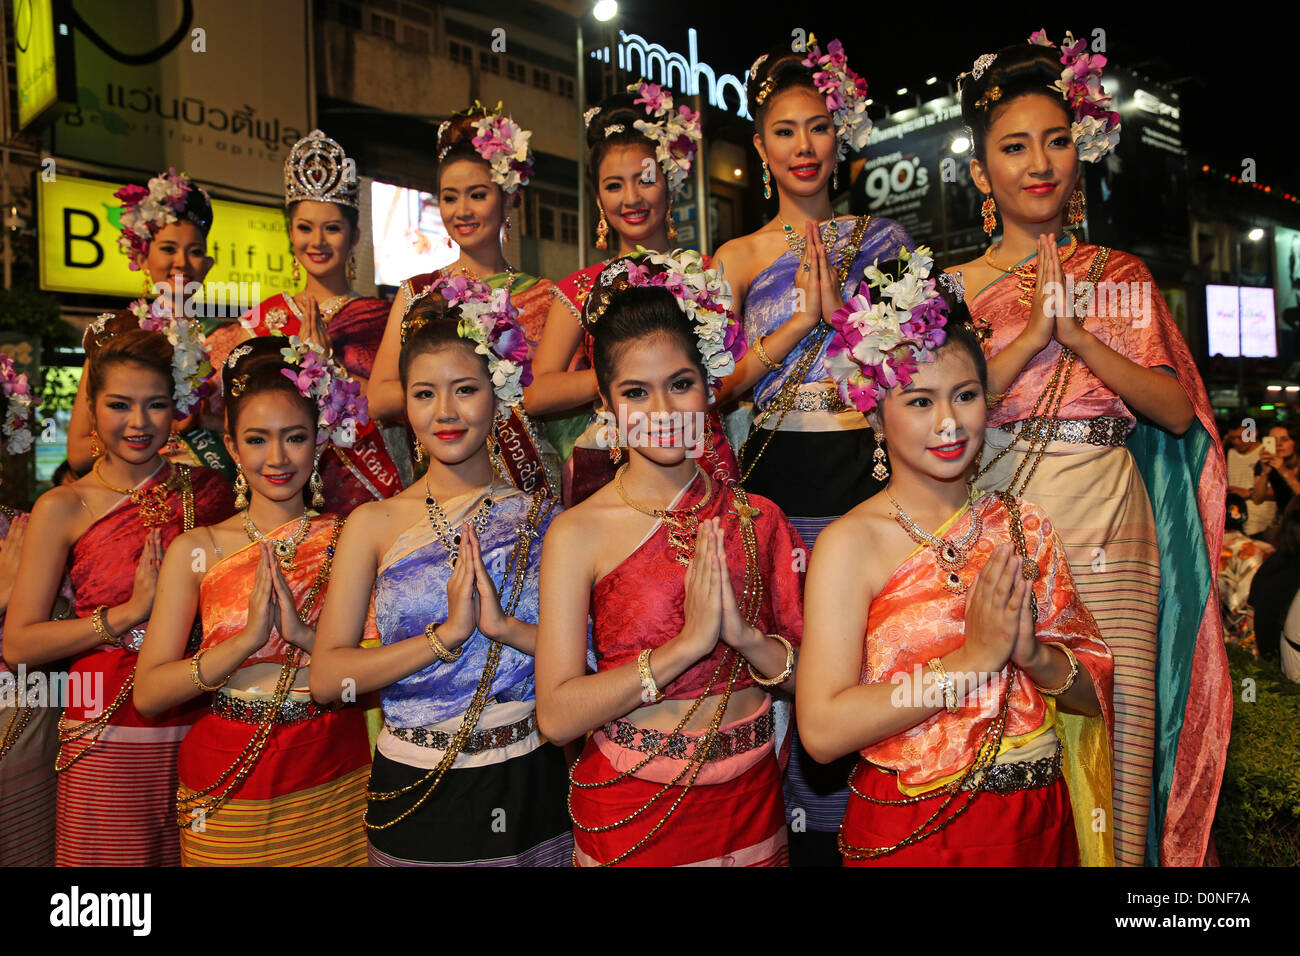 Chiang Mai, Thailand. 28th November 2012. Beauty Queens in the Parade at the Loy Krathong Festival, Chiang Mai, Thailand. Credit:  Paul Brown / Alamy Live News Stock Photo